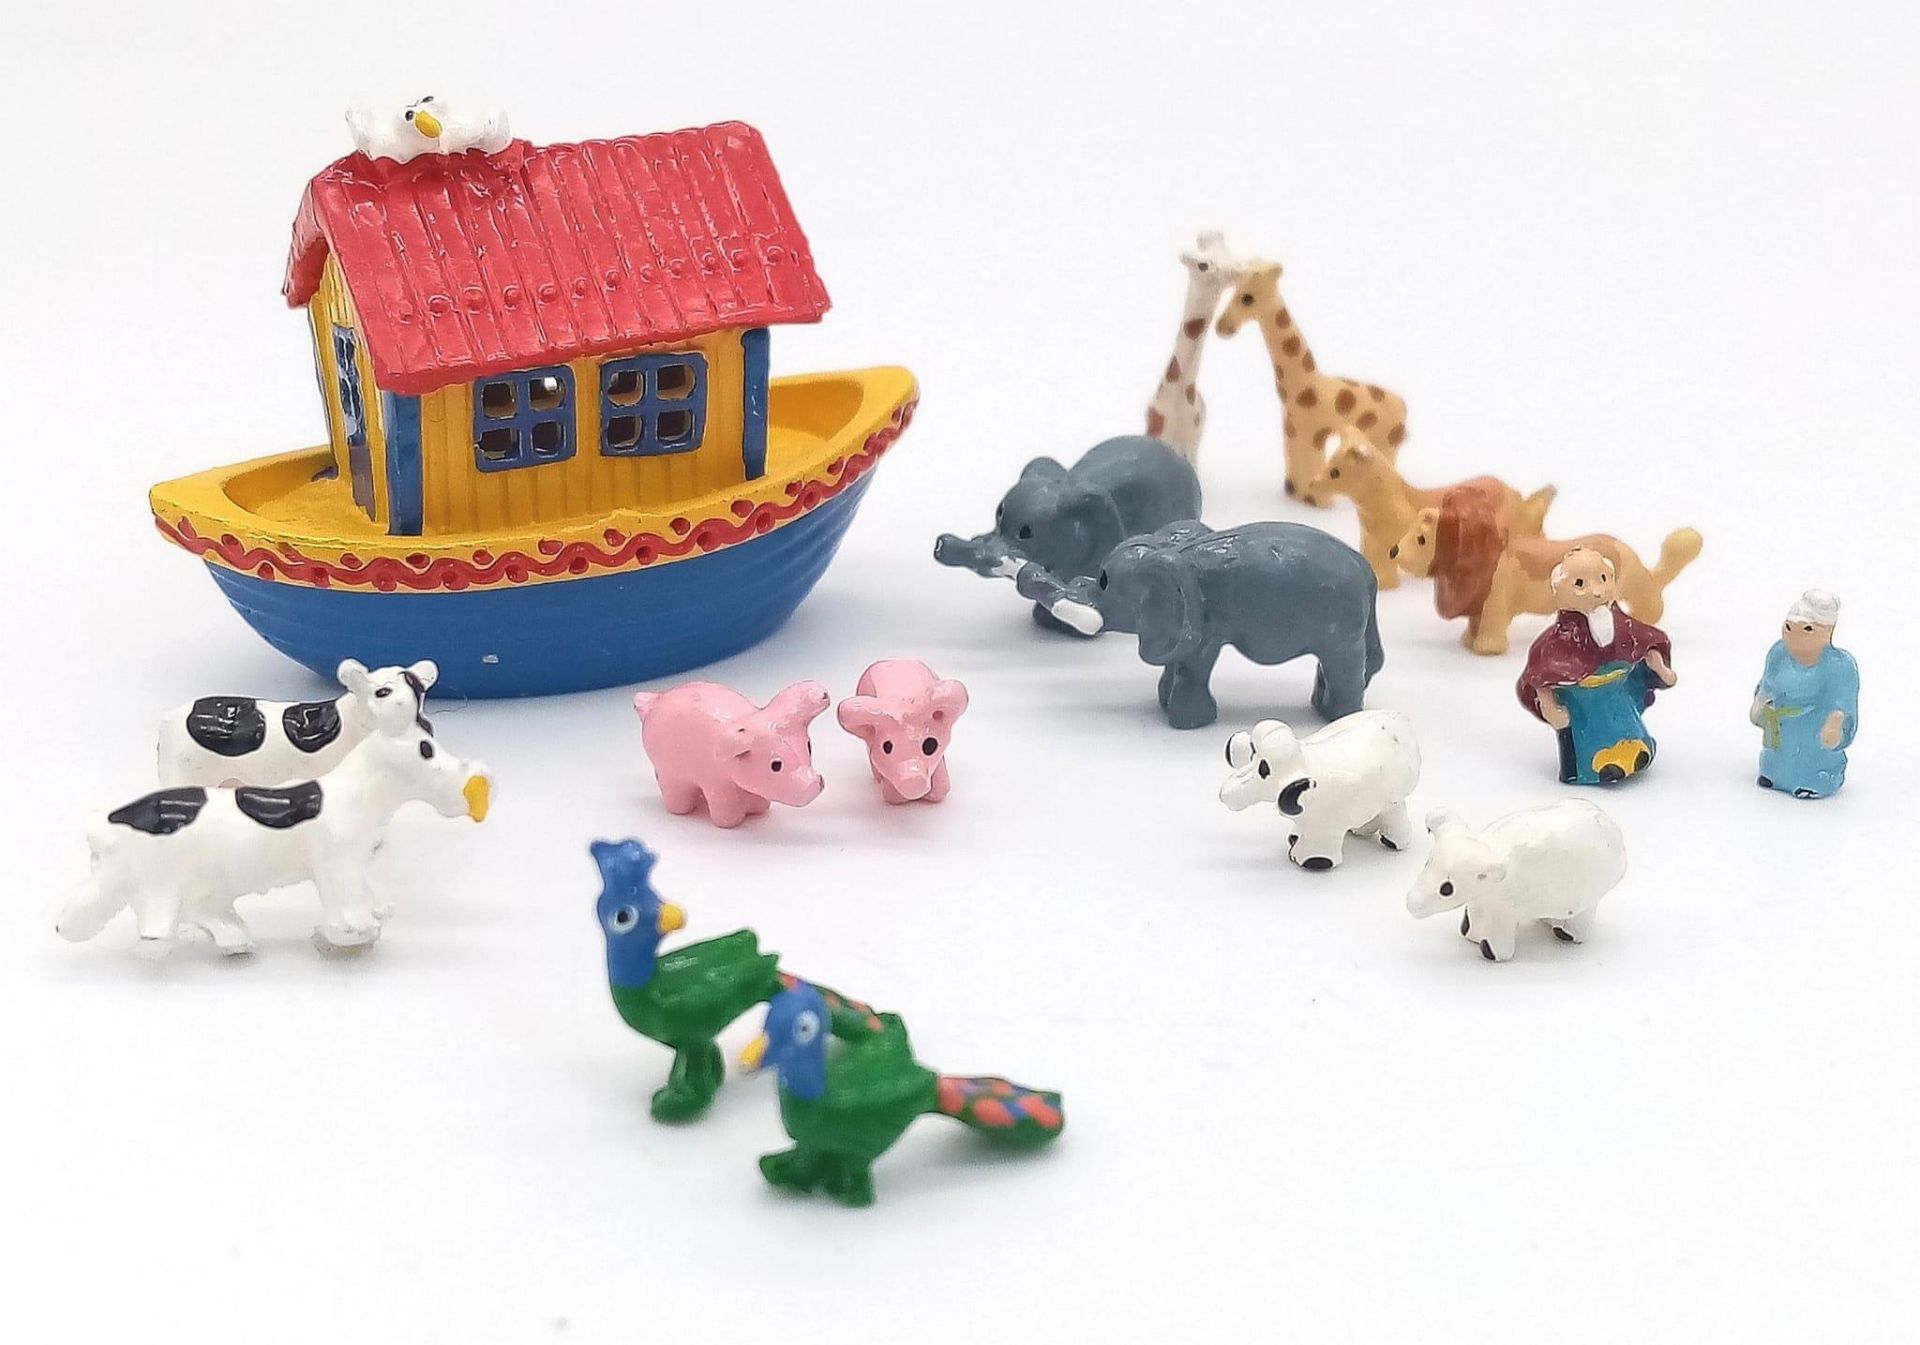 A Vintage Hantel Pewter Miniature Figurine - Noah's Ark and the Animals 2x2. - Image 2 of 5